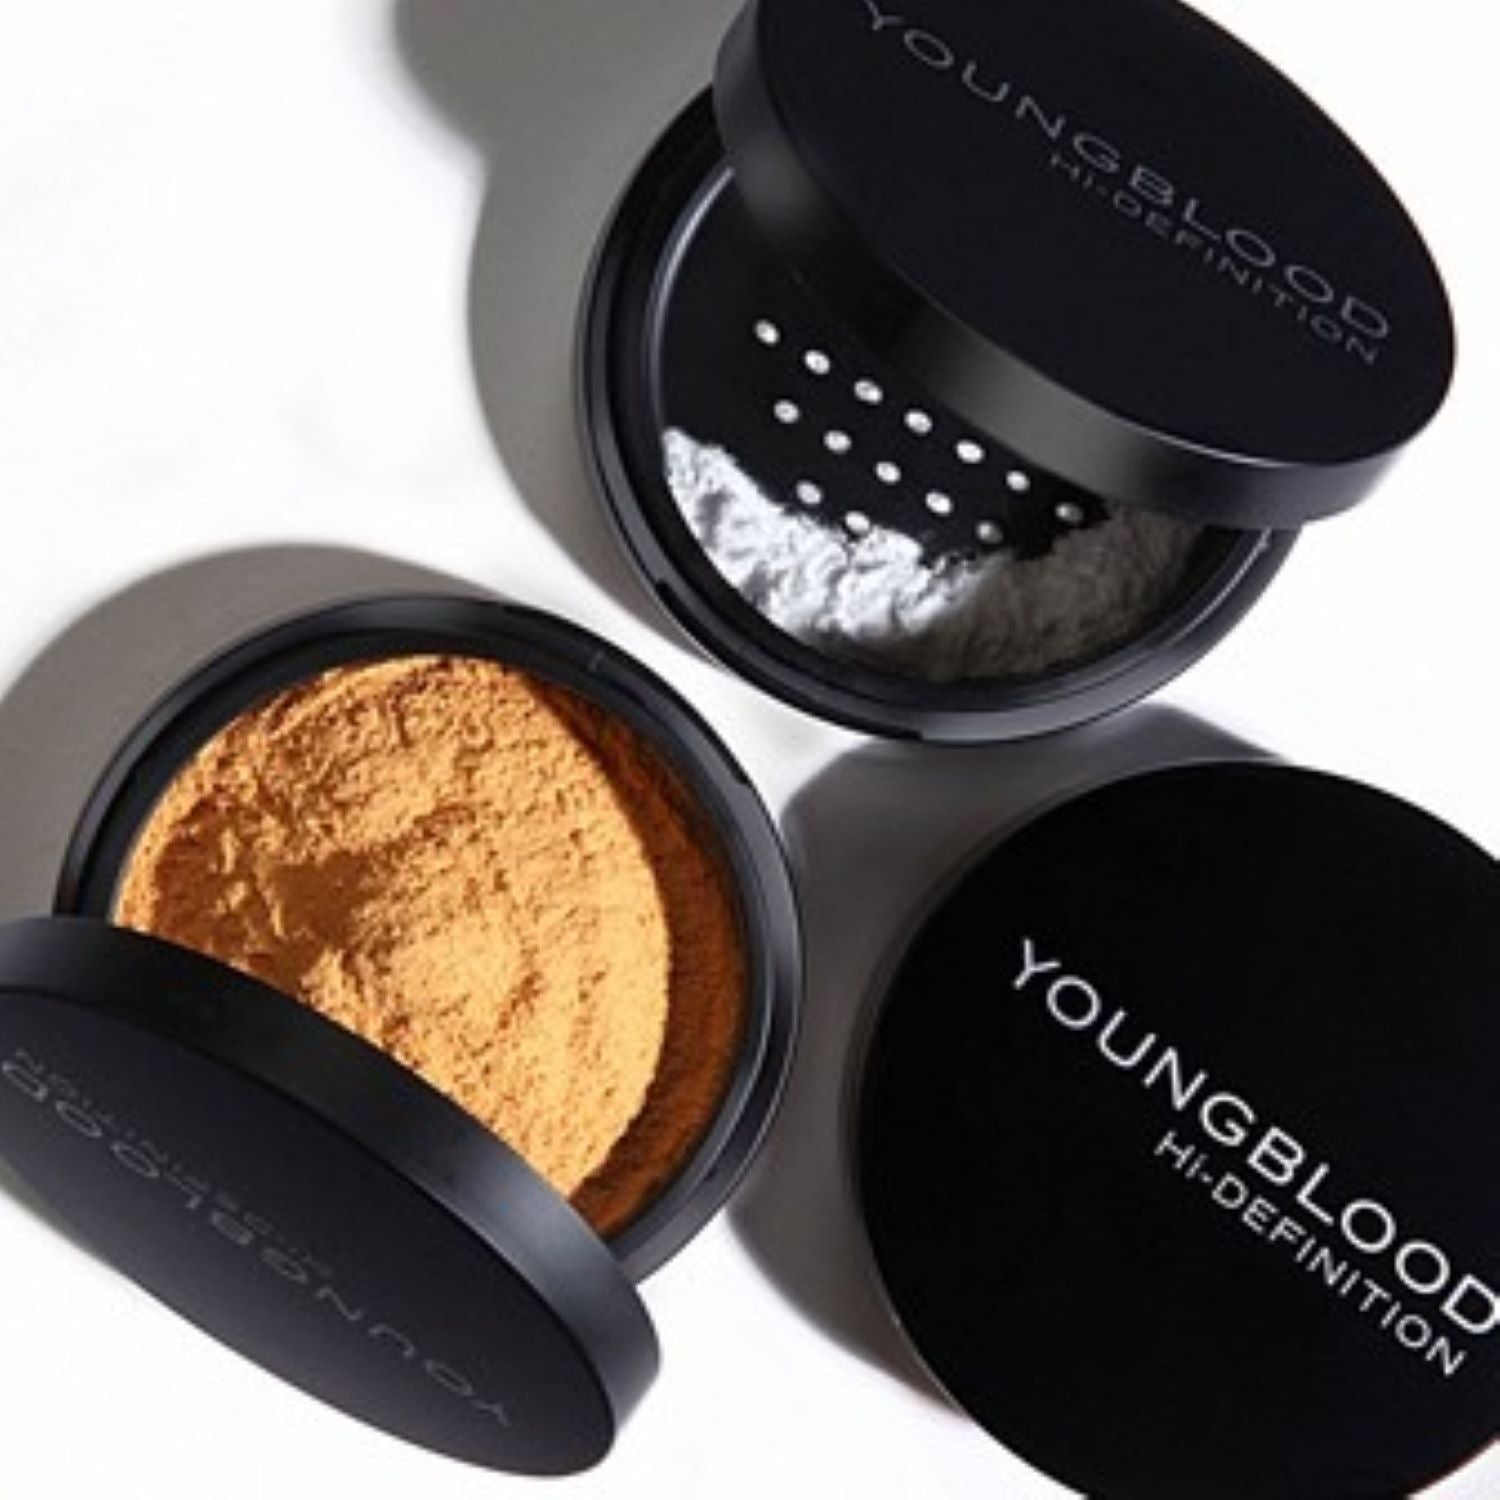 Youngblood Hi-Definition Hydrating Mineral Perfecting Powder / WARMTH